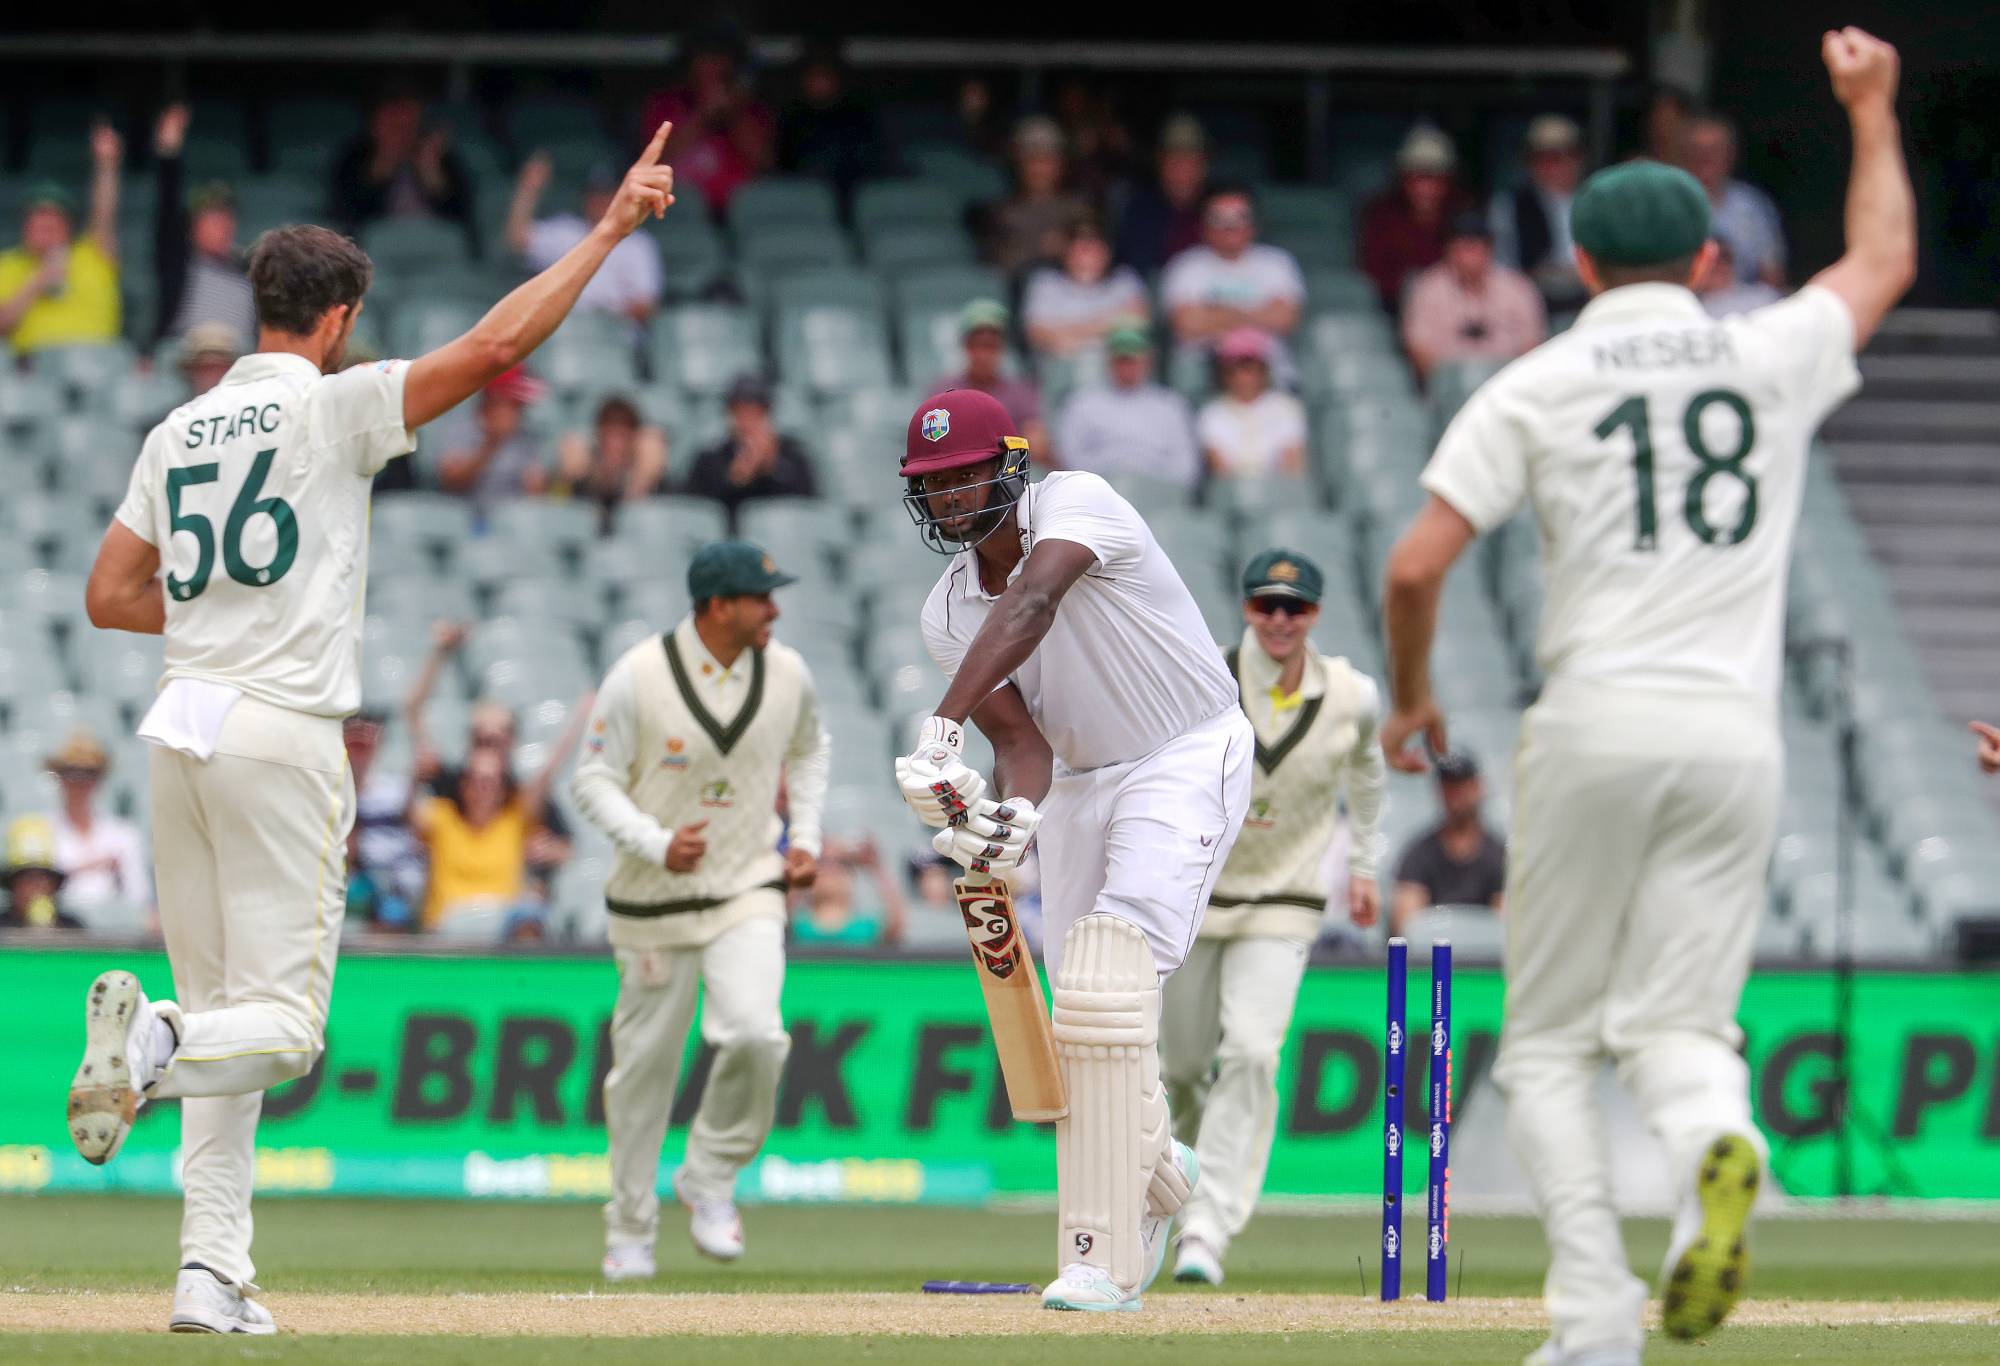 ADELAIDE, AUSTRALIA - DECEMBER 11: Jason Holder of West Indies bowled Mitchell Starc of Australia for 11 runs during day four of the Second Test Match in the series between Australia and the West Indies at Adelaide Oval on December 11, 2022 in Adelaide, Australia. (Photo by Sarah Reed - CA/Cricket Australia via Getty Images)